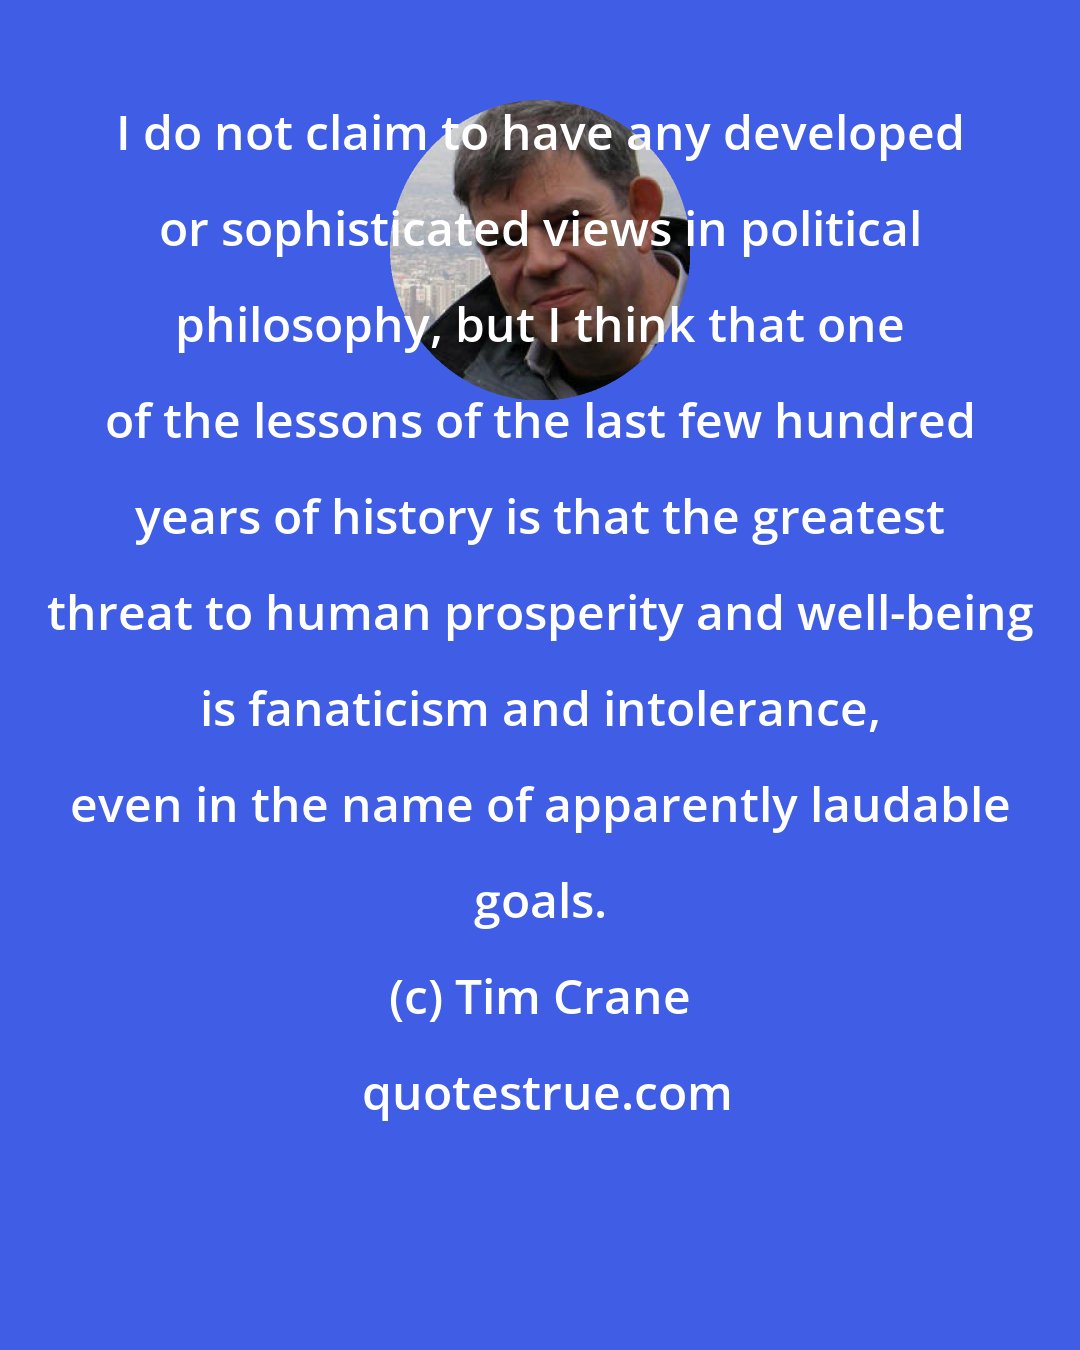 Tim Crane: I do not claim to have any developed or sophisticated views in political philosophy, but I think that one of the lessons of the last few hundred years of history is that the greatest threat to human prosperity and well-being is fanaticism and intolerance, even in the name of apparently laudable goals.